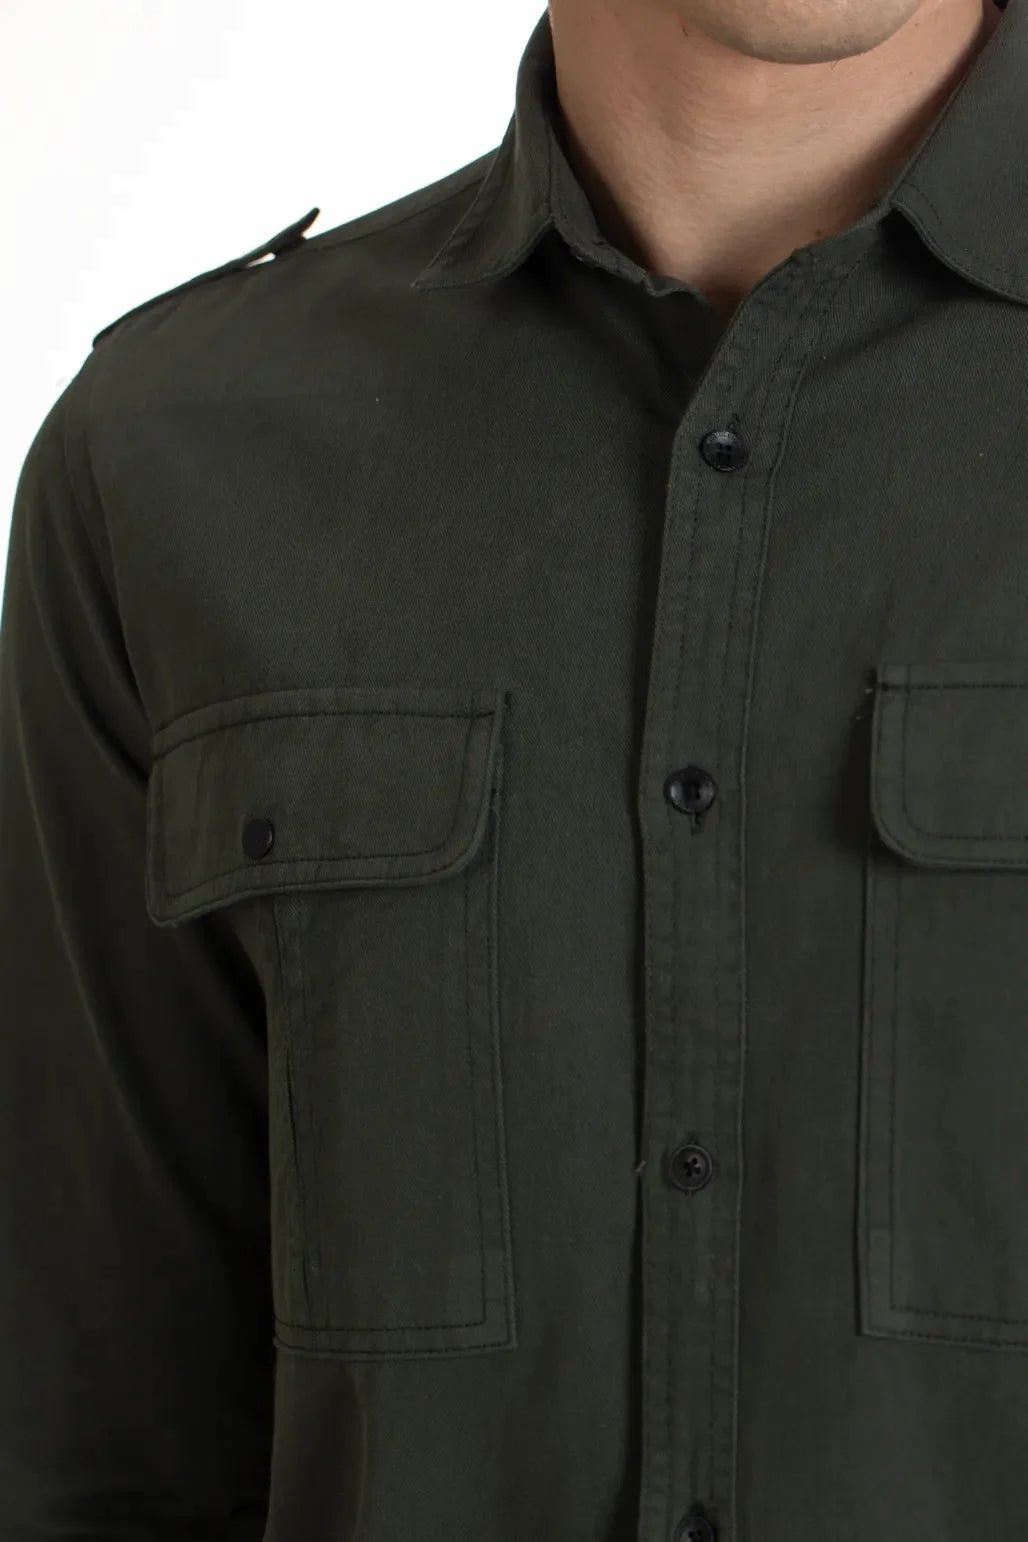 Buy Cavalry Twill Tactical Shirt Online.